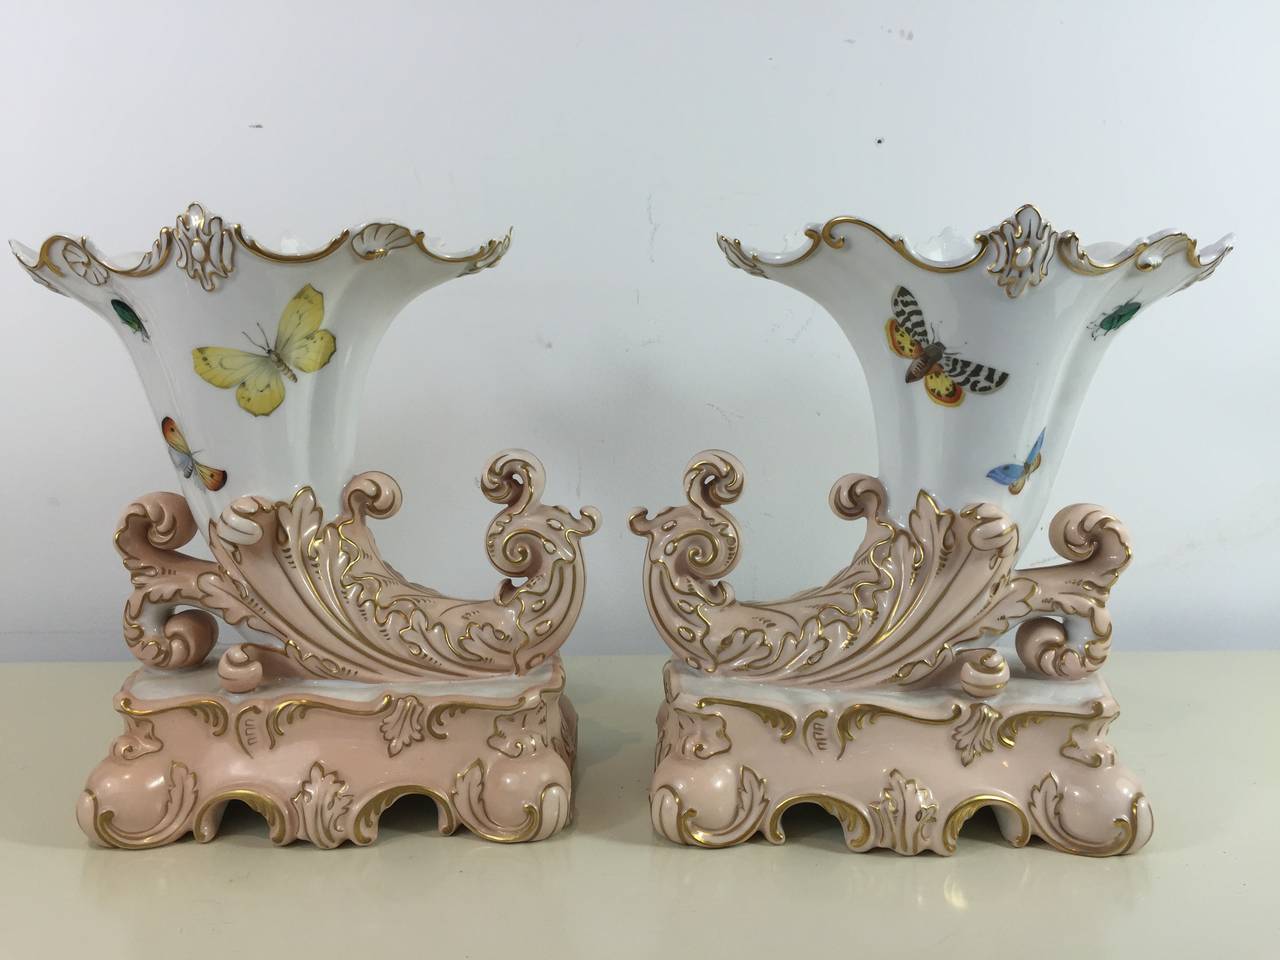 Robinson and Leadbeater (R&L) Naturalistic Cornucopia mantel vases, each one decorated with butterflies and insects, with salmon and gilt highlights.